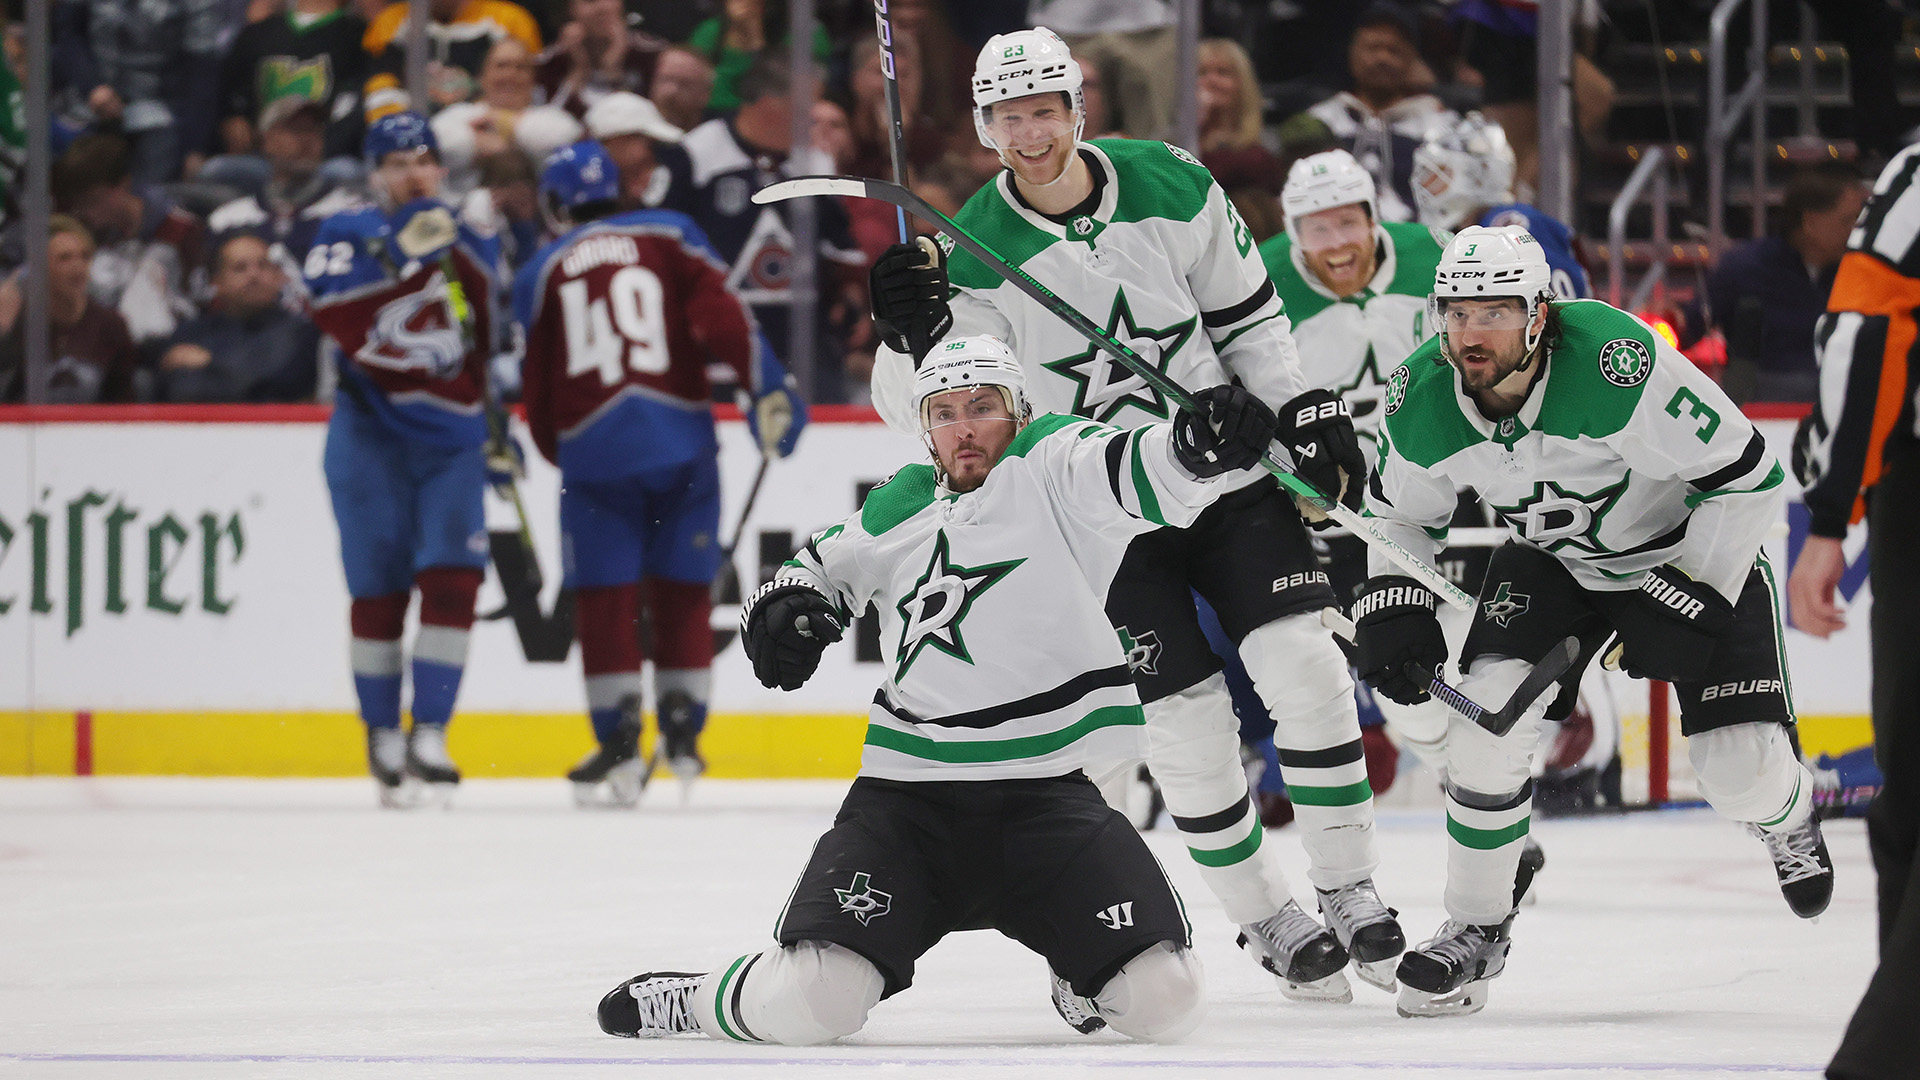 DENVER, COLORADO - MAY 17: Matt Duchene #95 of the Dallas Stars and teammates Esa Lindell #23 and Chris Tanev #3 celebrate Duchene's game-winning goal in double overtime against the Colorado Avalanche in Game Six of the Second Round of the 2024 Stanley Cup Playoffs at Ball Arena on May 17, 2024 in Denver, Colorado. (Photo by Michael Martin/NHLI via Getty Images)